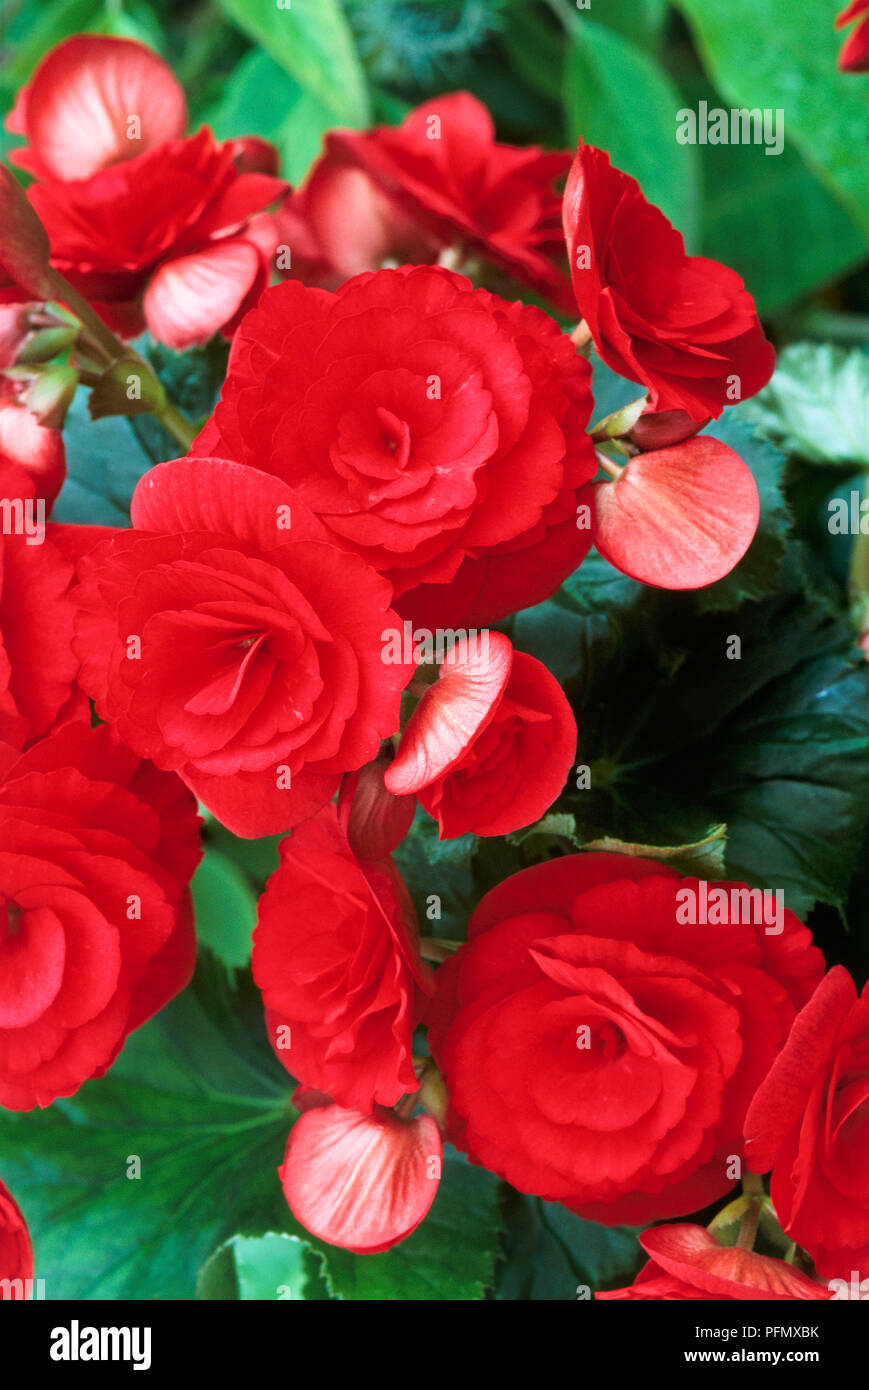 Begonia 'Barcos', close-up of red flowers Stock Photo